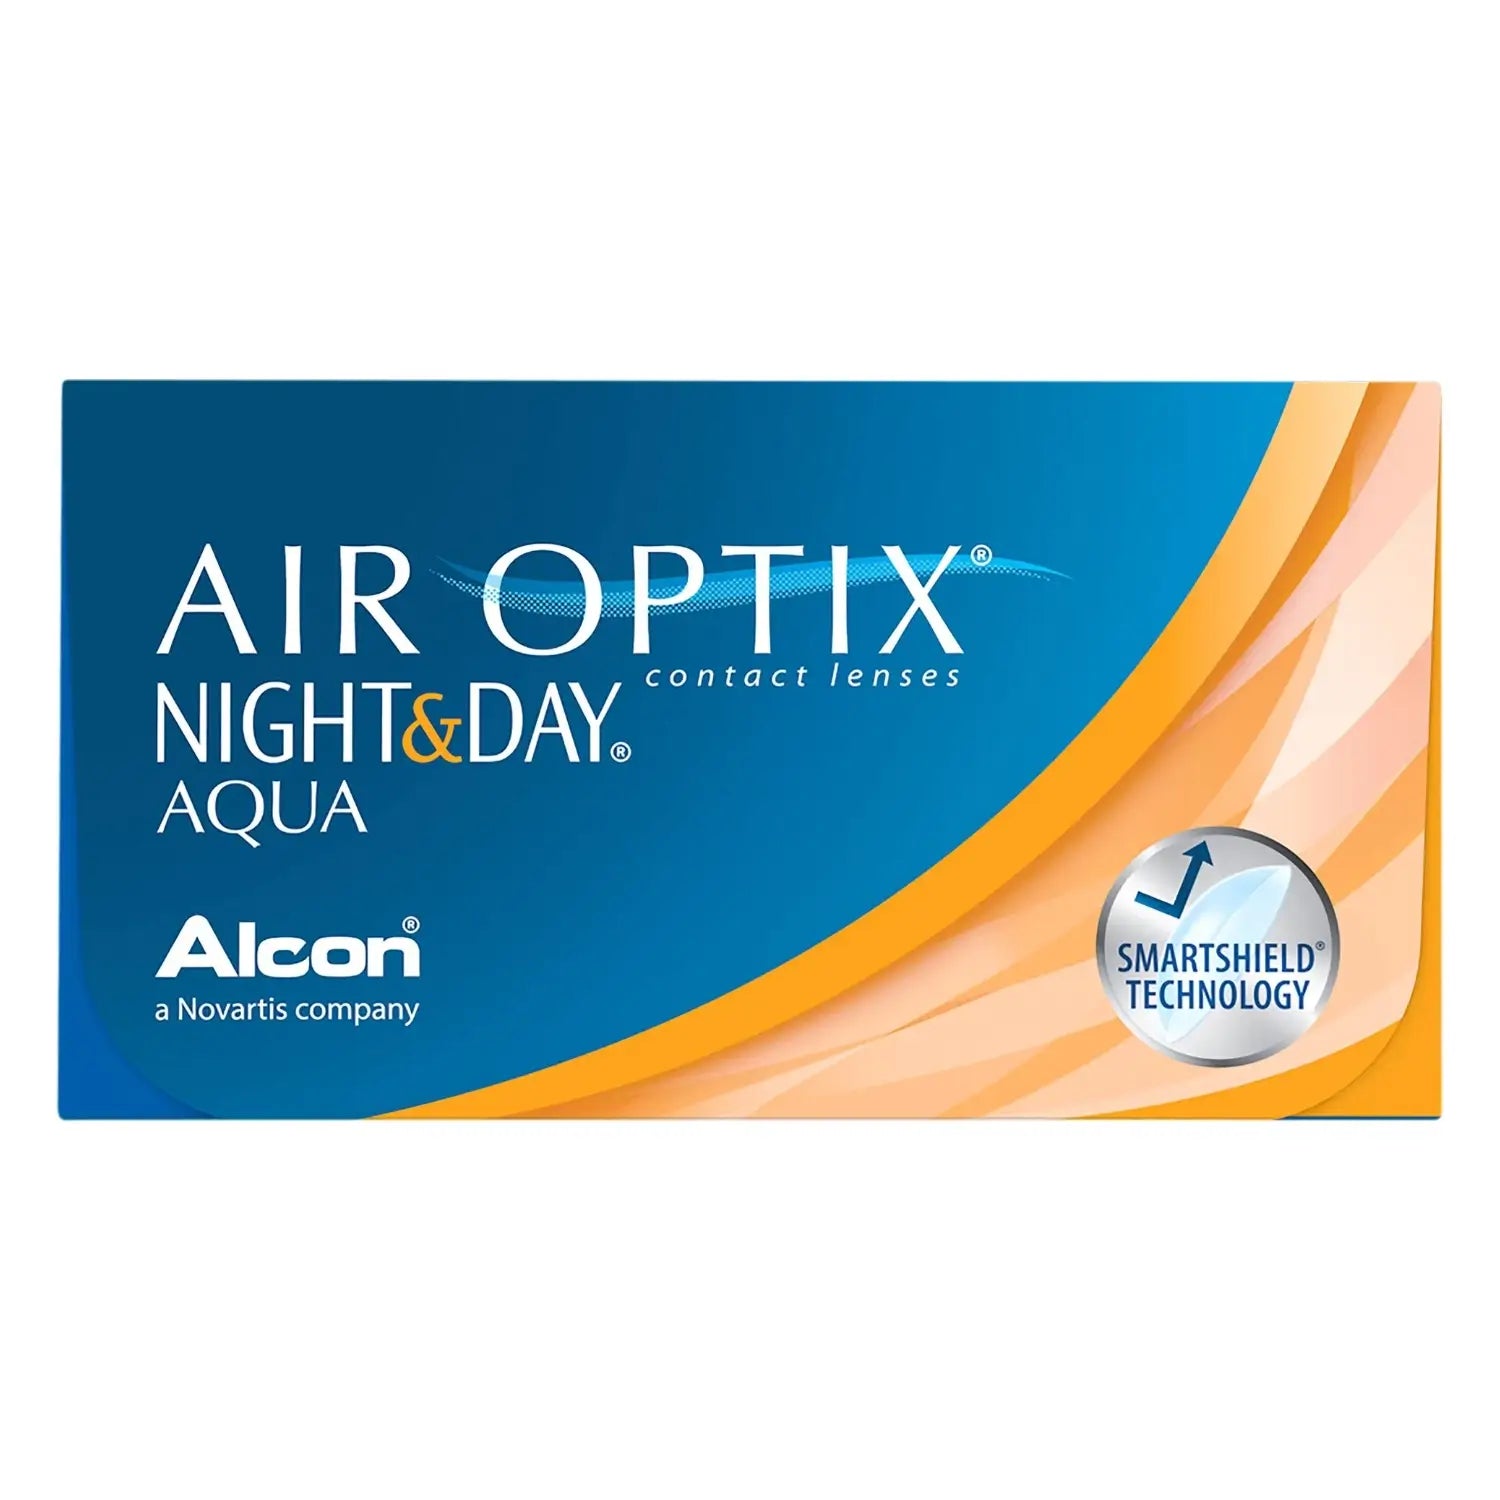 Certified Air Optix Night and Day monthly Contact Lenses by Alcon on sale online at The Optical Co at the best prices